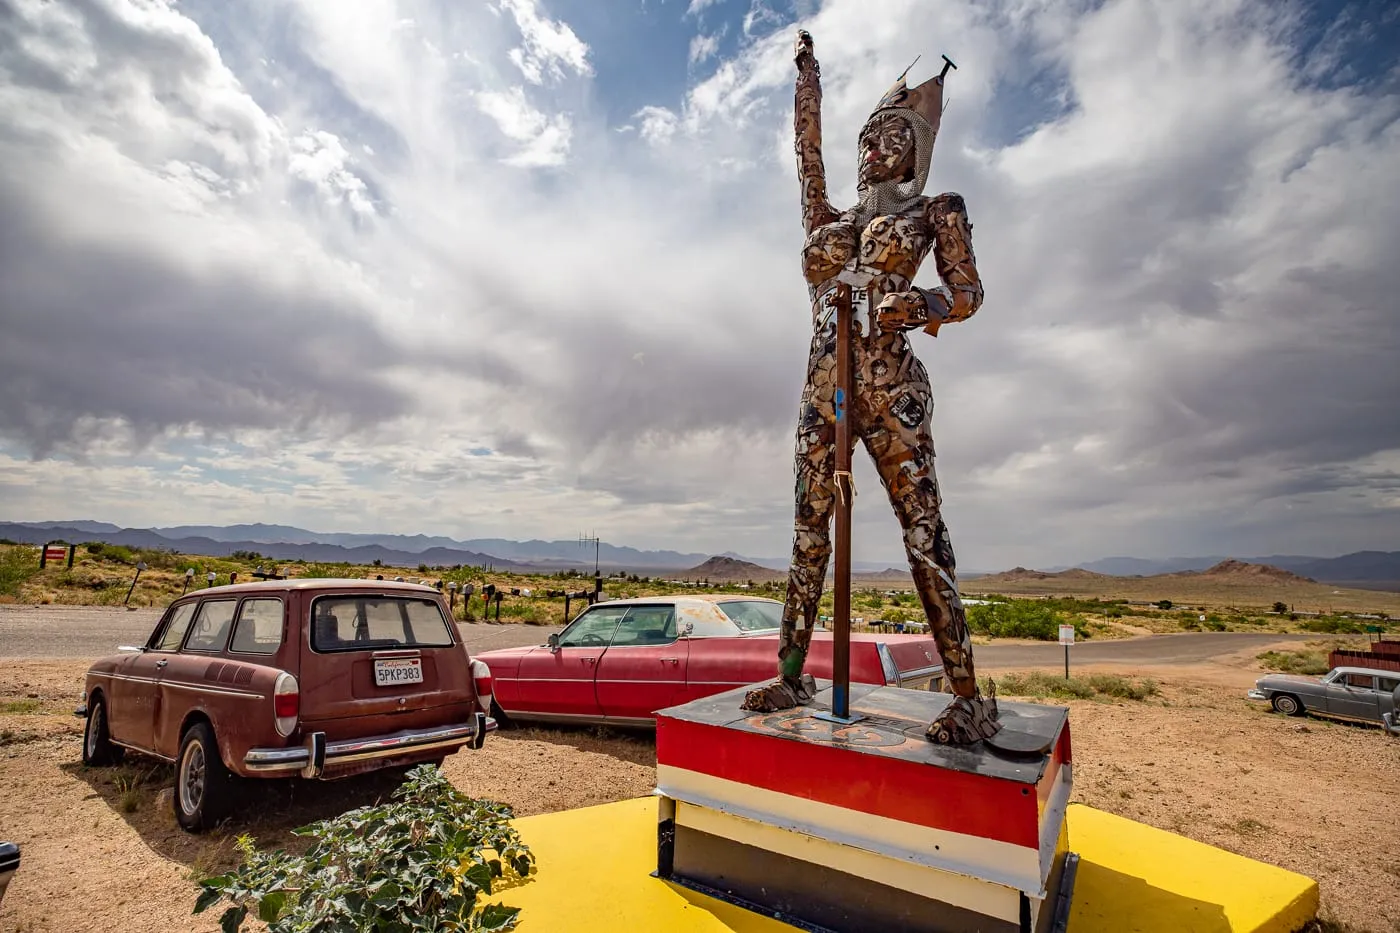 Guardian of Route 66 sculpture by Gregg Arnold at Antares Point Visitor Center & Gift Shop on Route 66